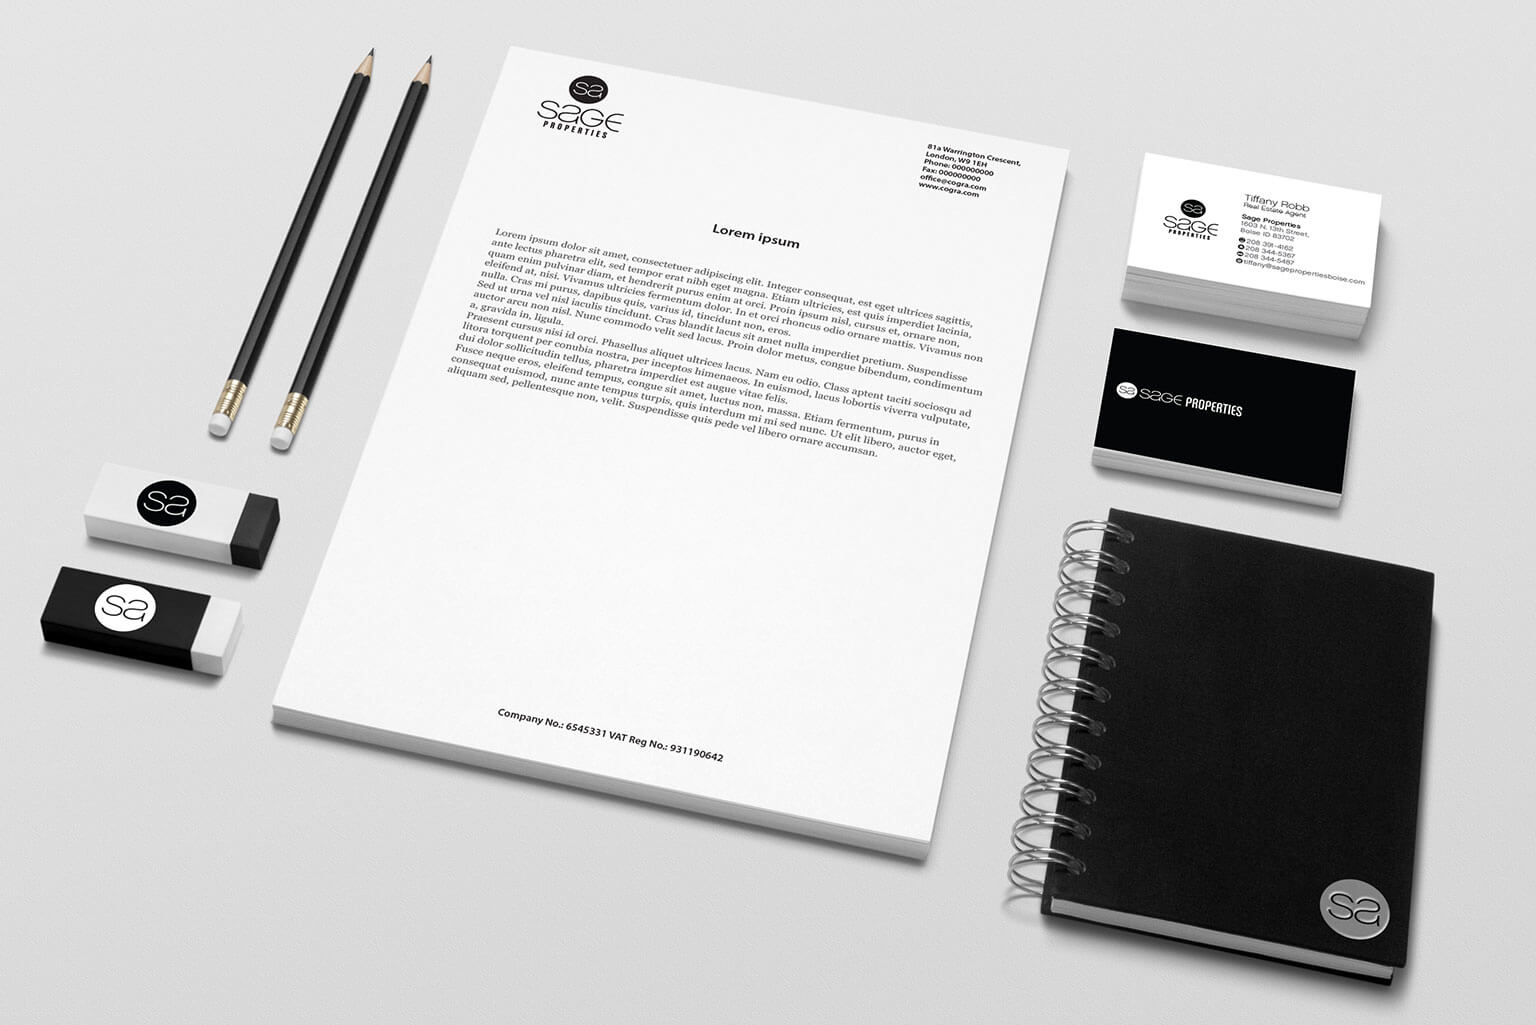 Sage Properties is a real estate agency in Boise, ID. The goal to make a brand identity system that is professional, minimal, classy and with a clean design.